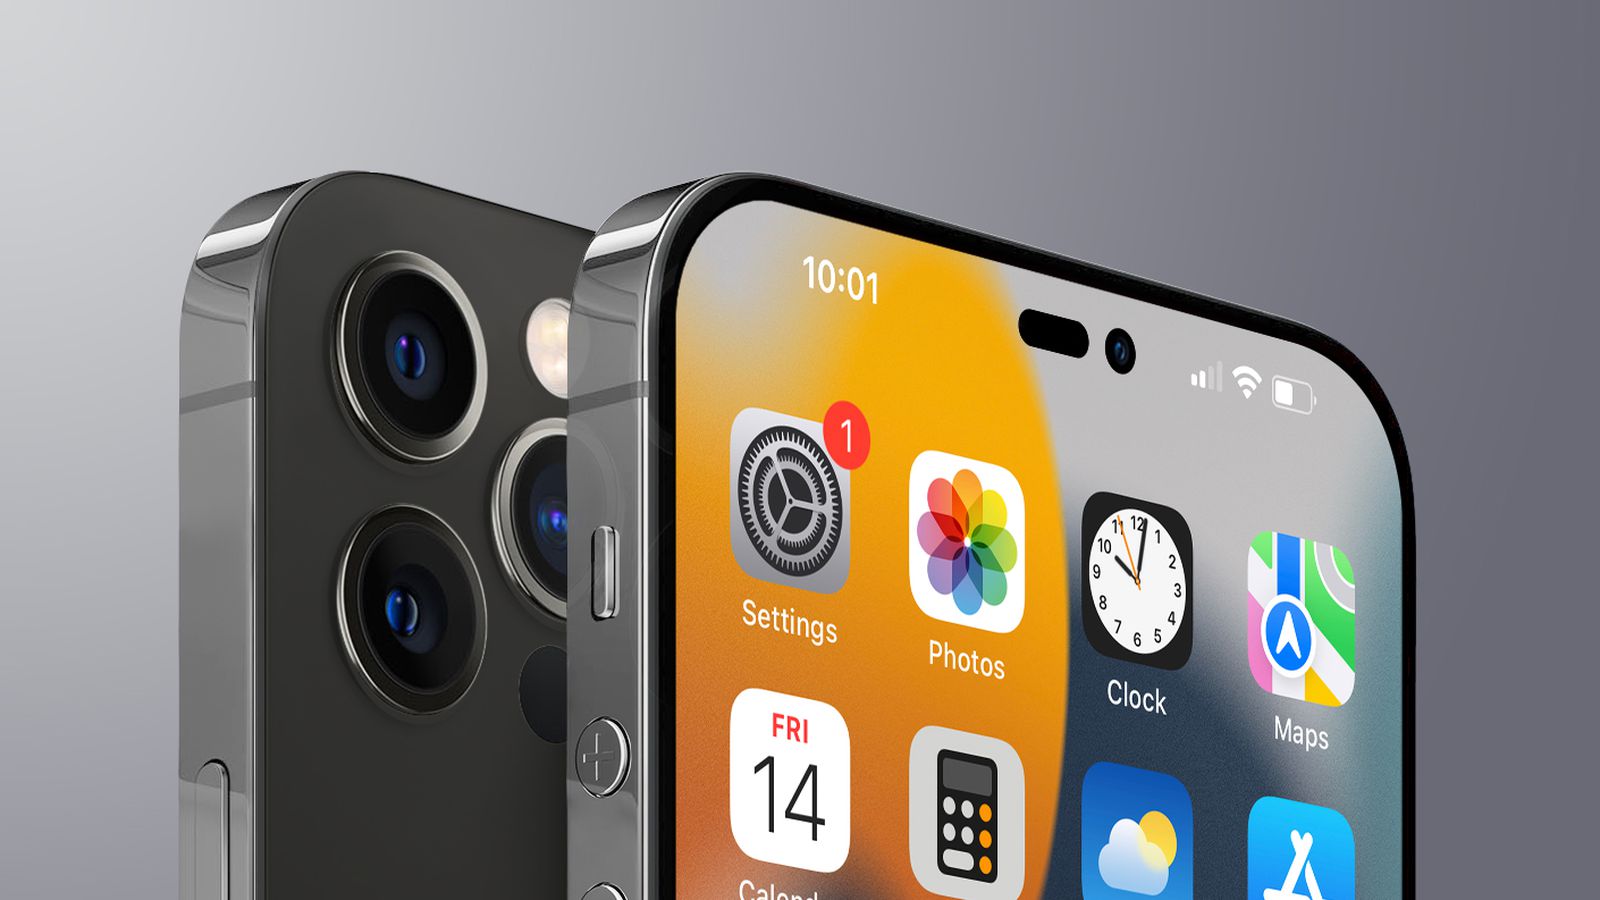 gurman: standard iphone 14 to miss out on 48mp camera and a16 chip, satellite connectivity features could launch this year - macrumors